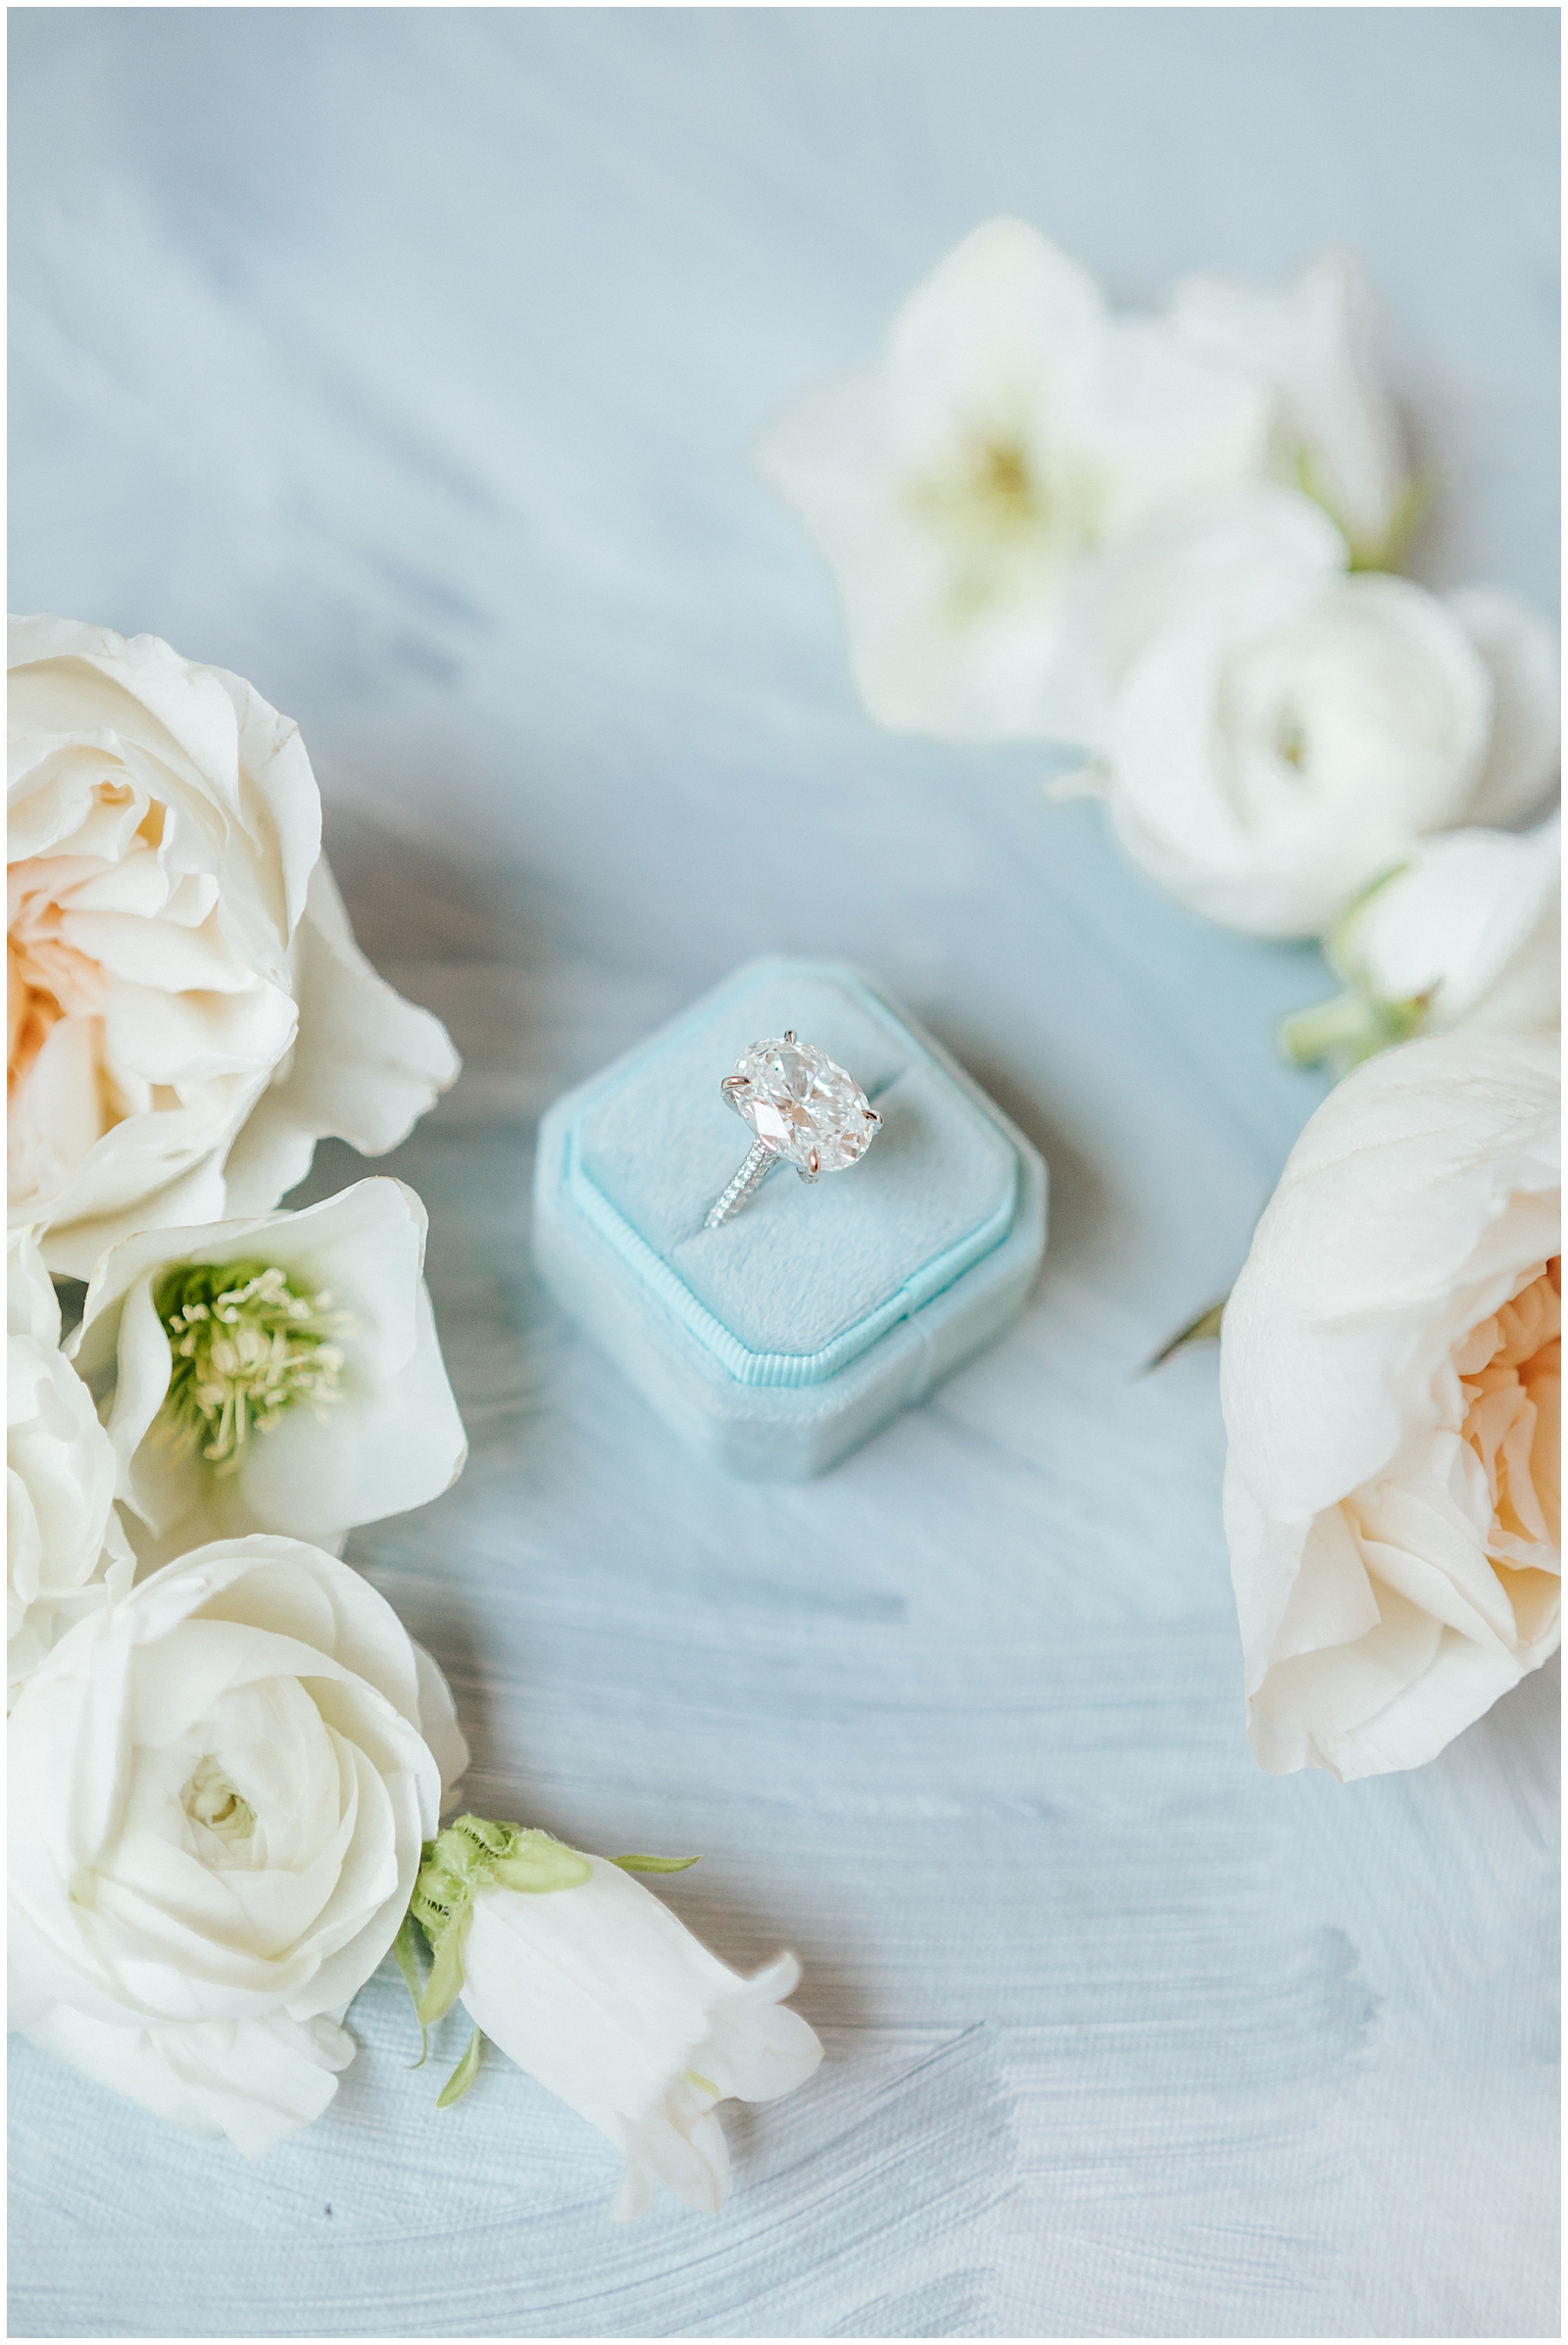 10 carat Engagement ring in dusty Blue Ring Box surrounded by Florals Wedding Flatlay